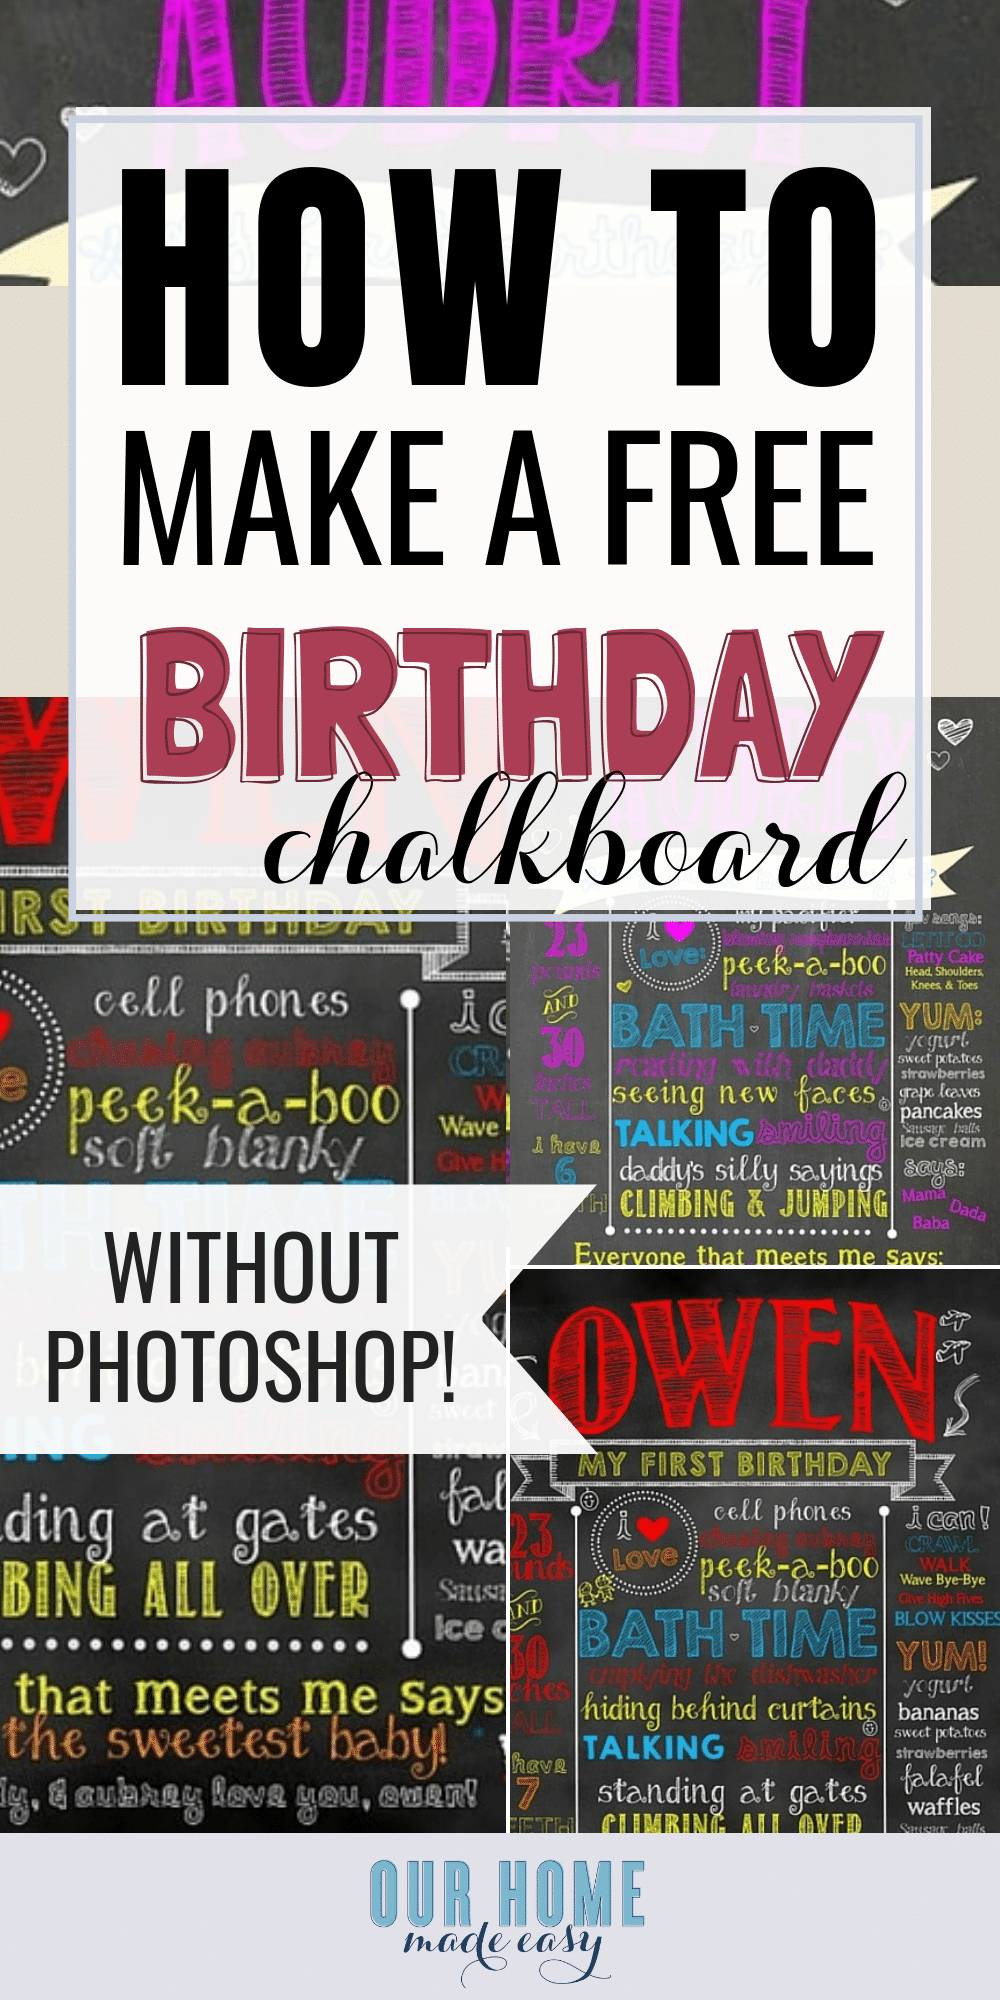 Who says you need to spend lots of money to create a custom birthday chalkboard? It's super easy! Here's how to create your birthday chalkboard for FREE! #firstbirthday #chalkboard #diybirthday